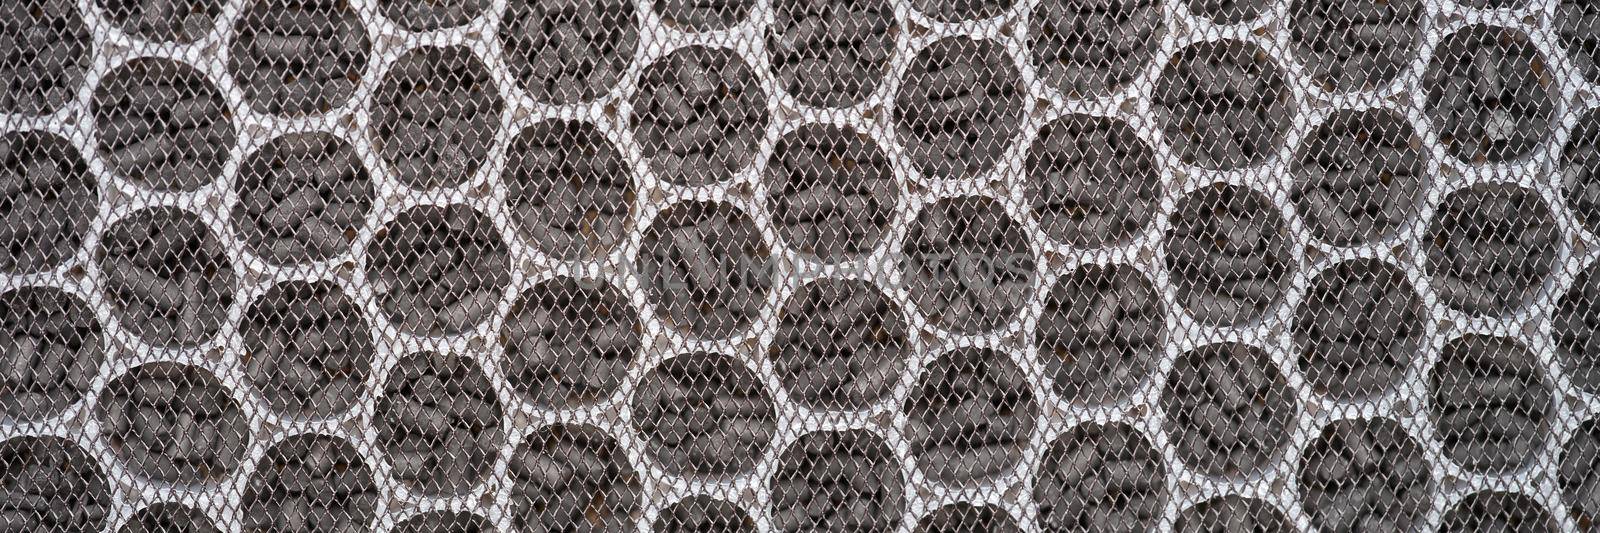 Air purification system filter grill, close-up by kuprevich